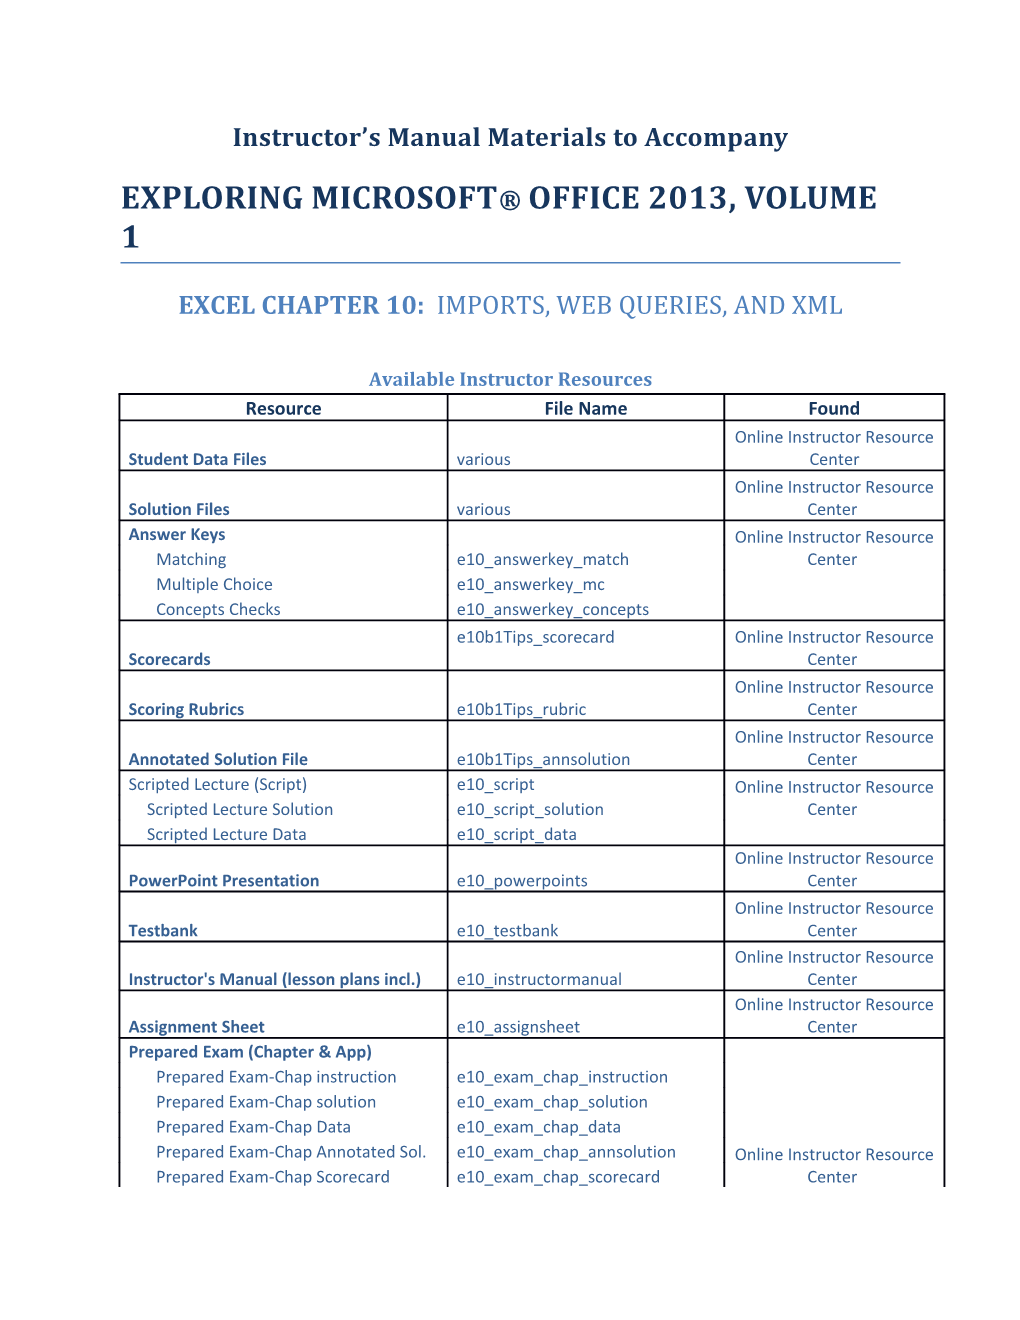 Excel Chapter 10: Imports, Web Queries, and Xml